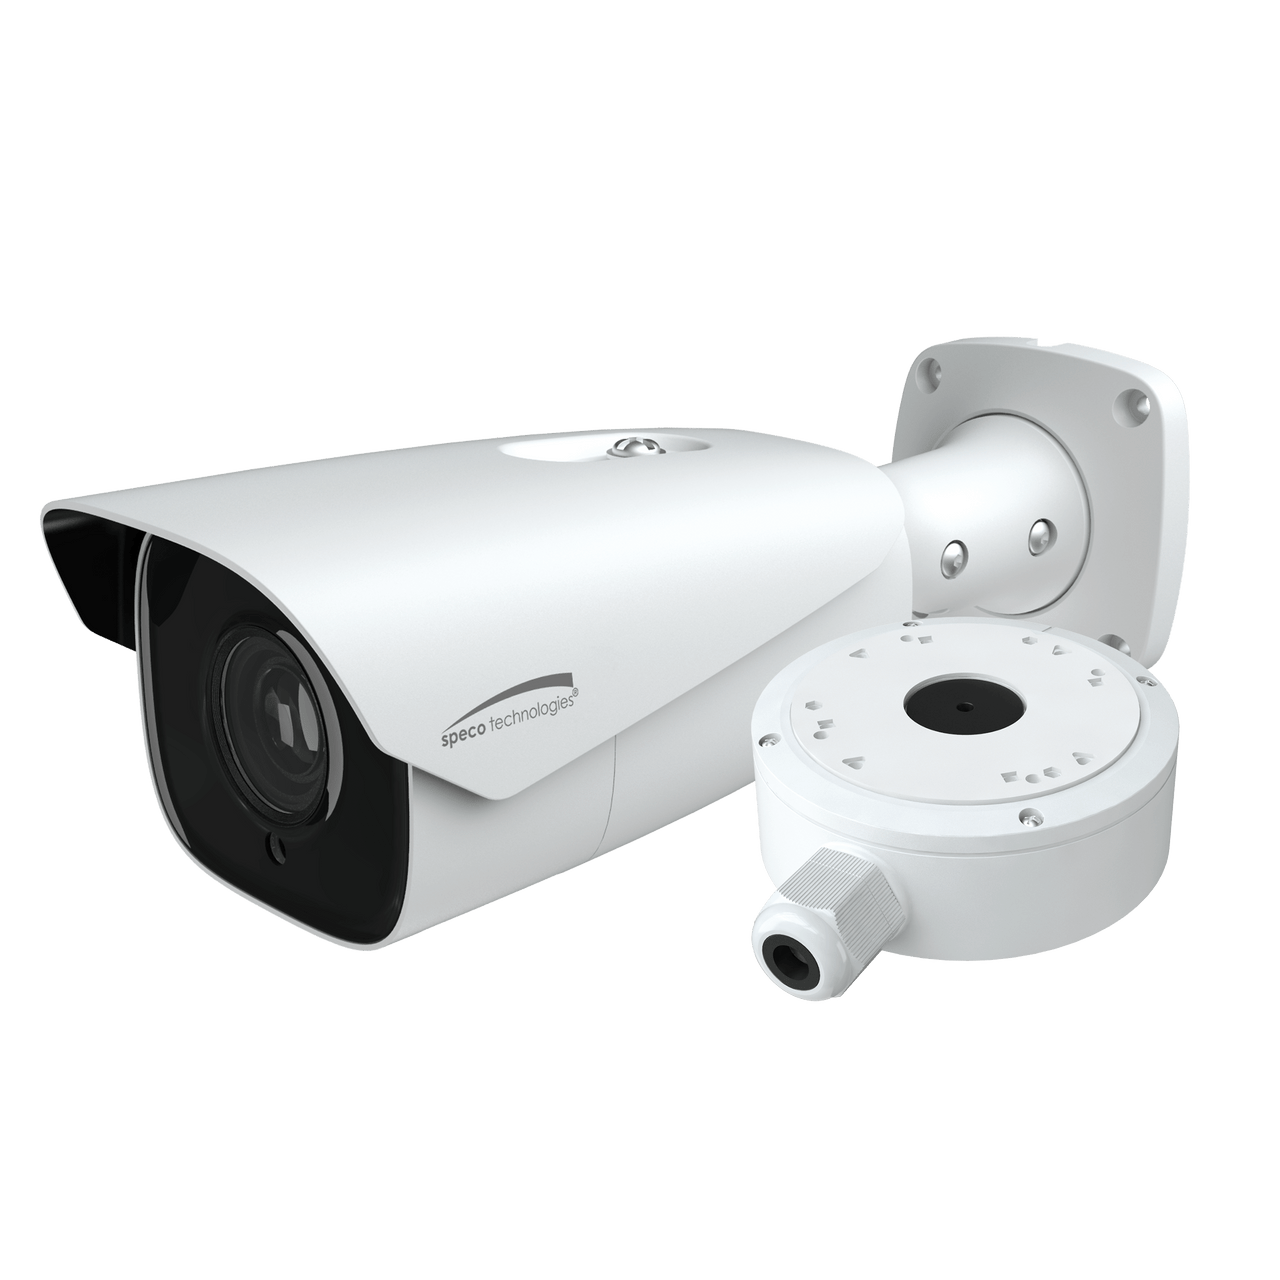 Speco Technologies O8B7M 8MP H.265 IP Bullet Camera with IR, 2.8-12mm Motorized lens, Junction Box, White Housing (O8B7M)